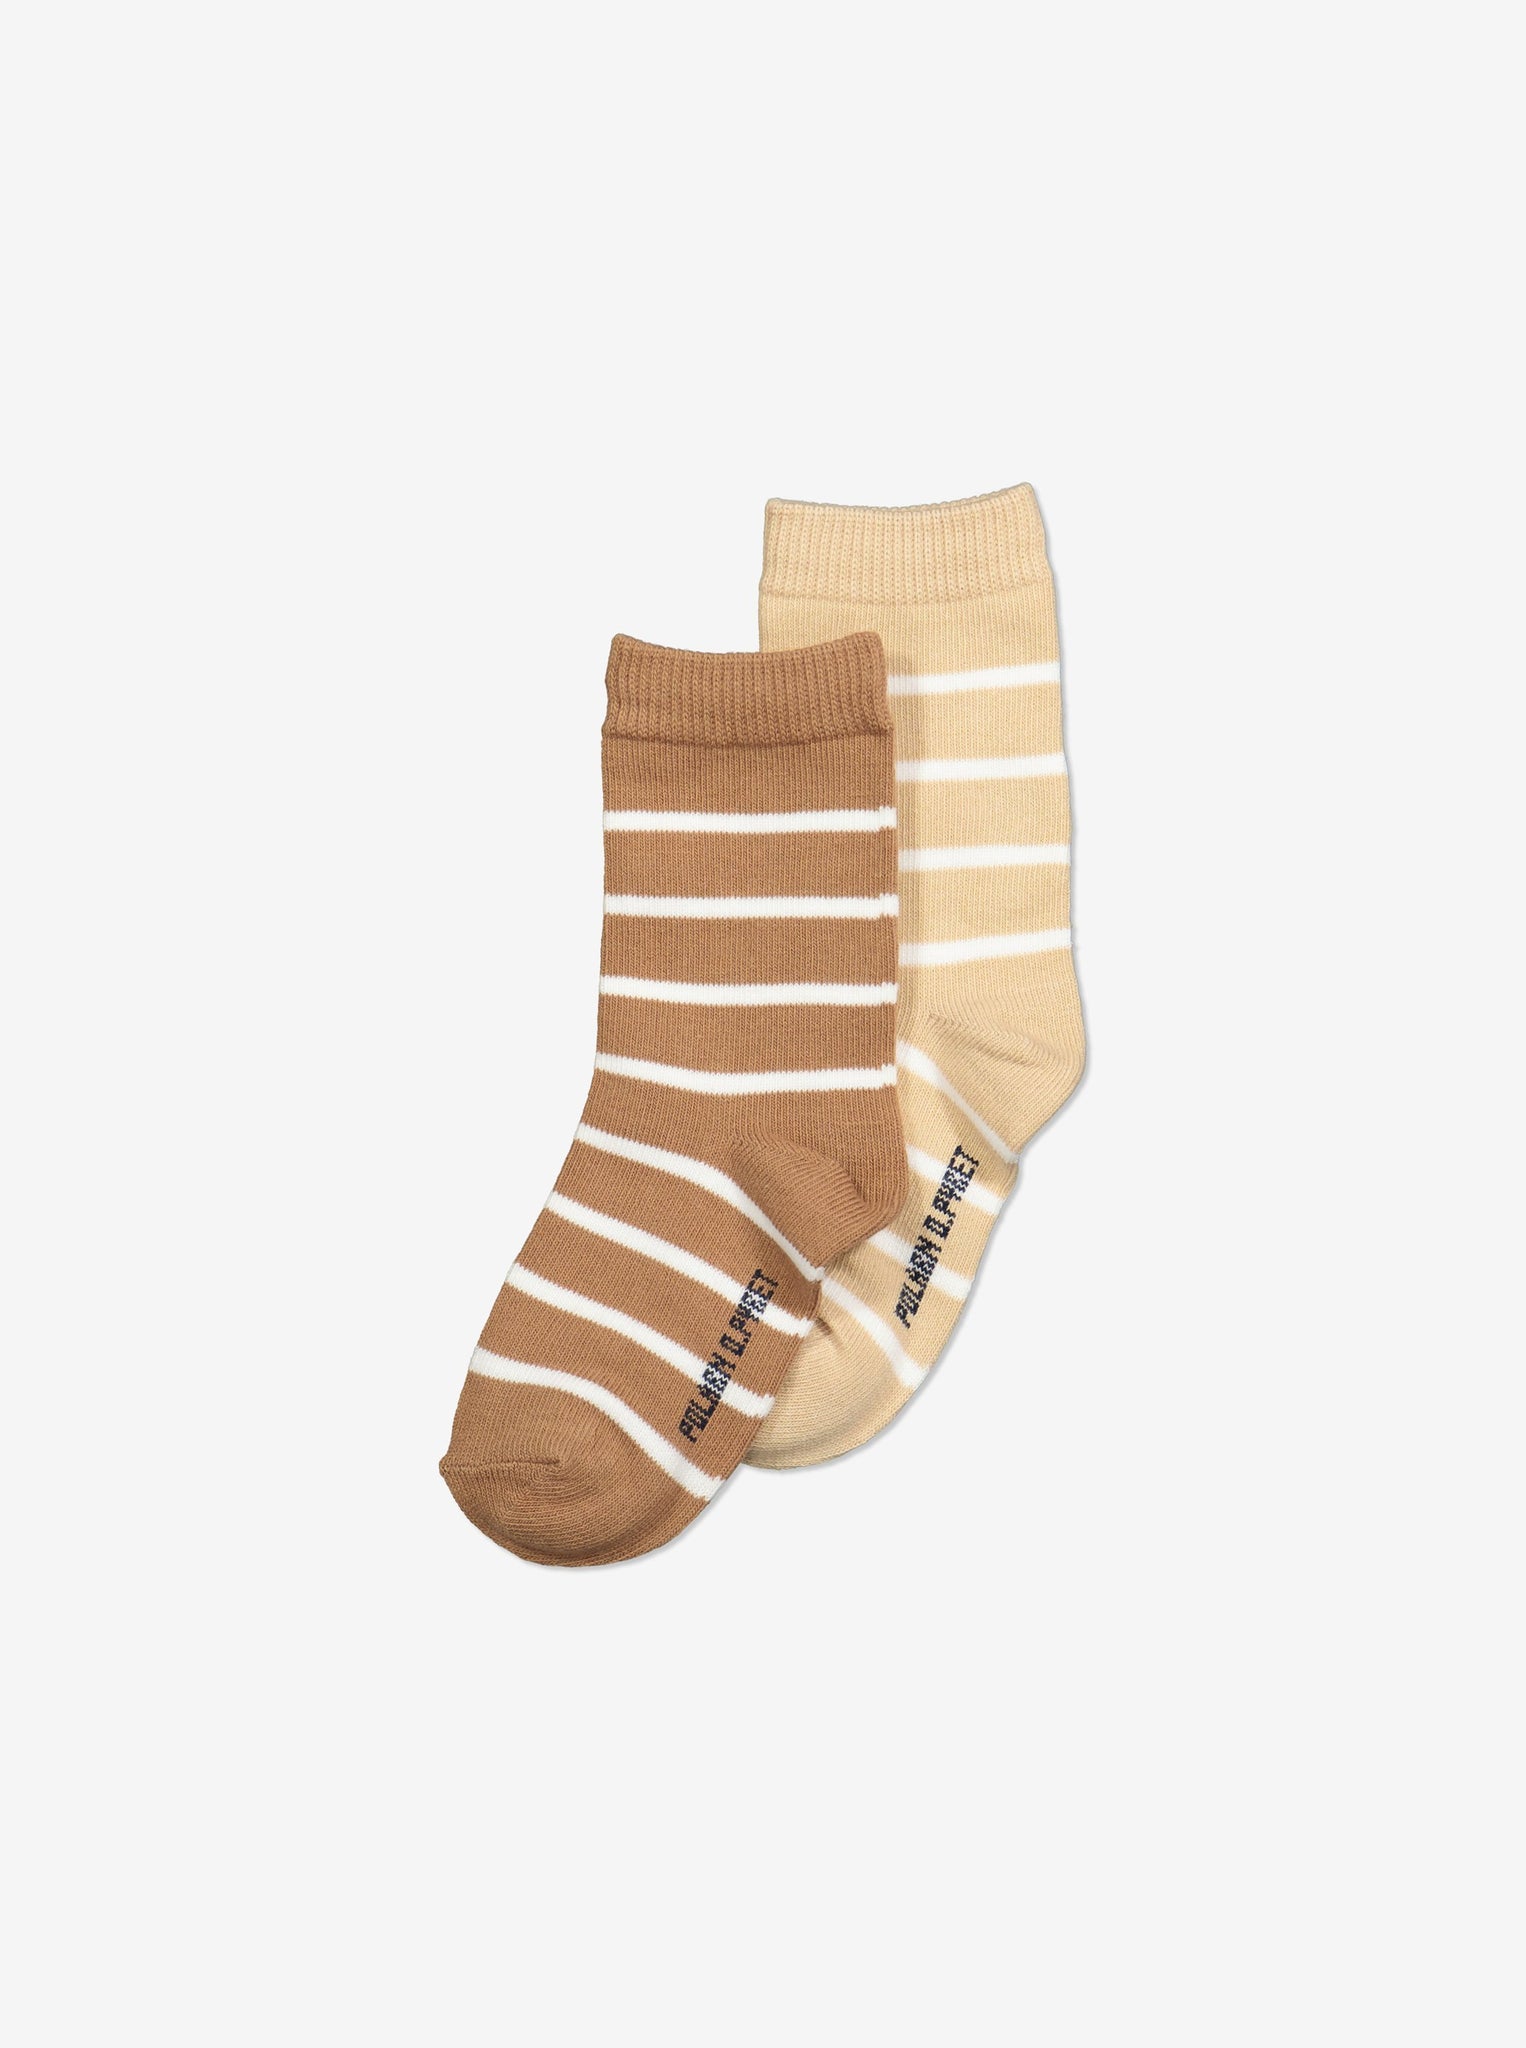  Organic Beige Kids Socks Multipack from Polarn O. Pyret Kidswear. Made from ethically sourced materials.